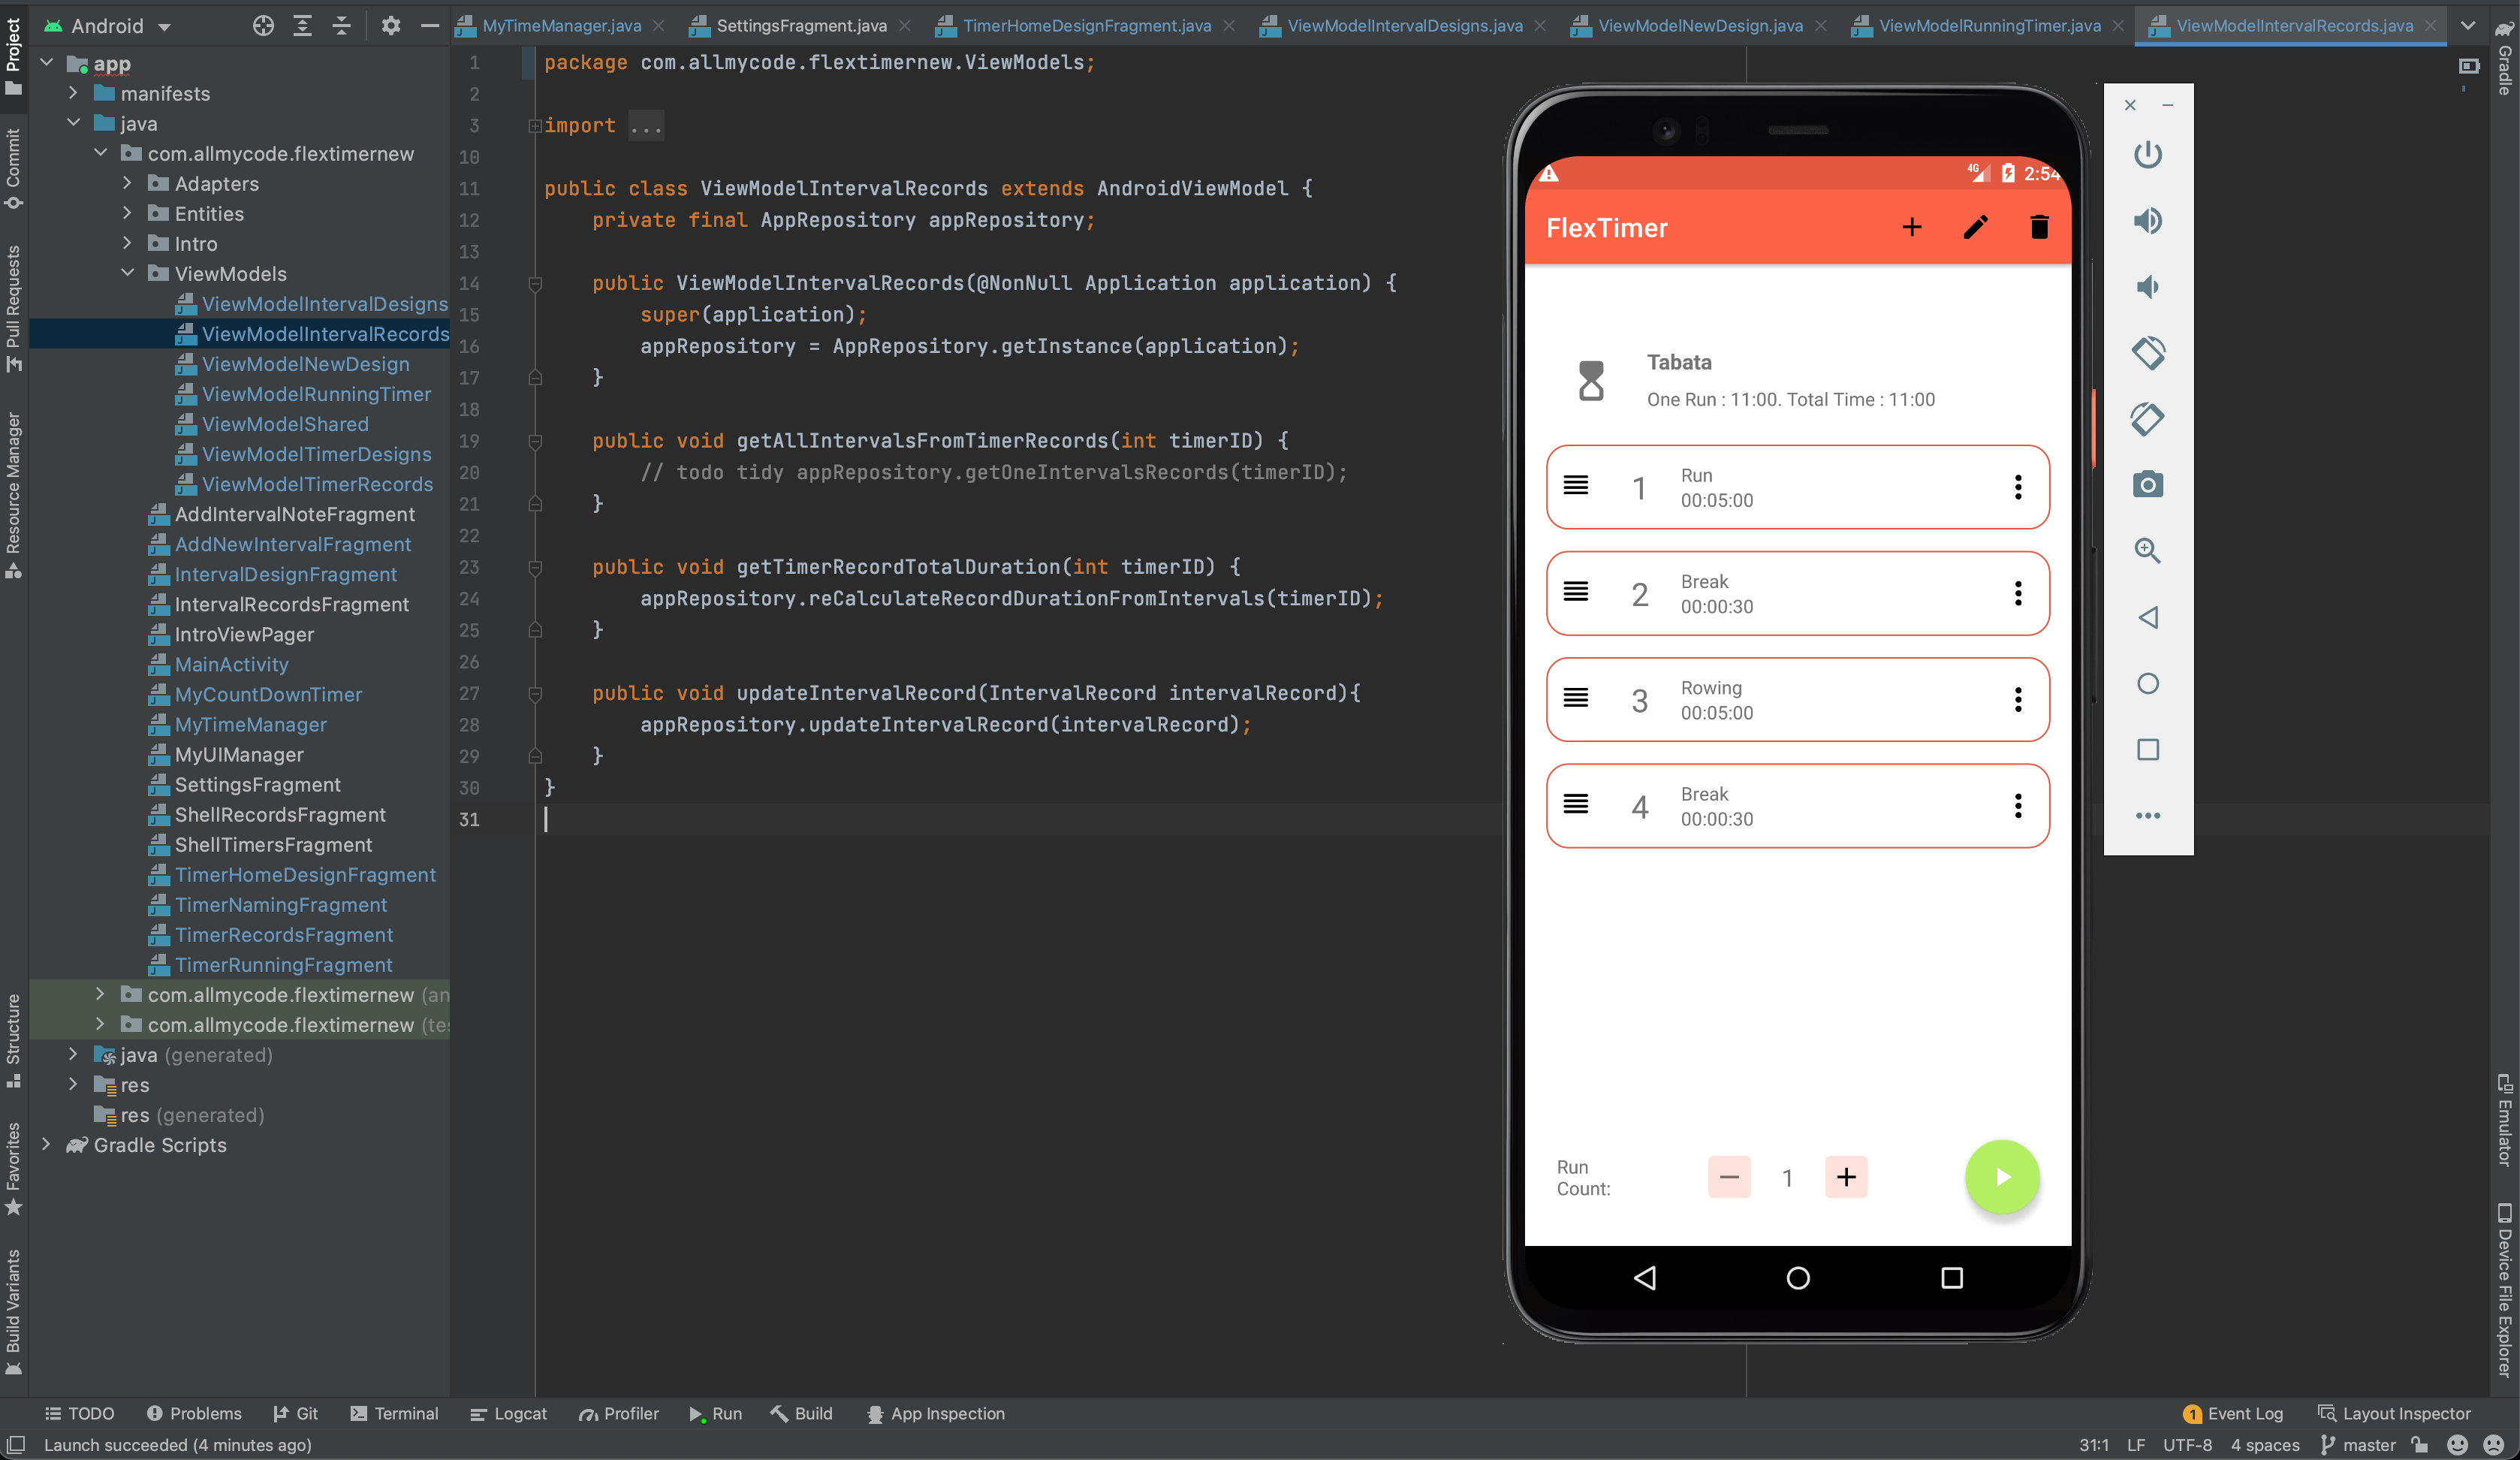 Android Studio Screen showing app